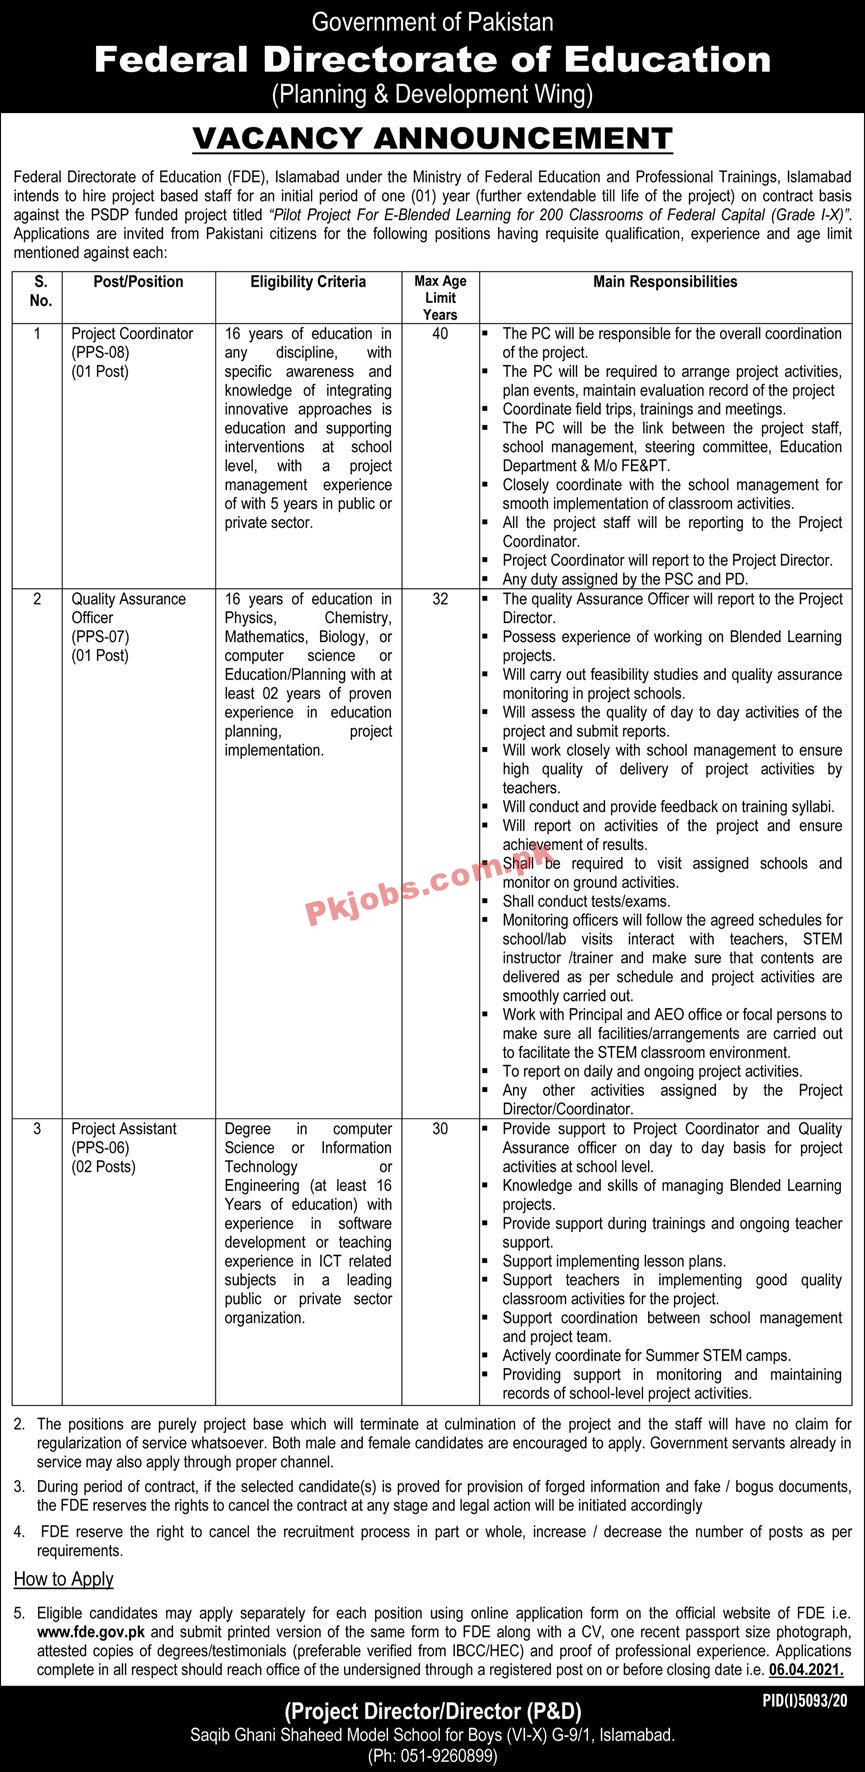 Federal Directorate of Education (FDE) Management PK Jobs 2021